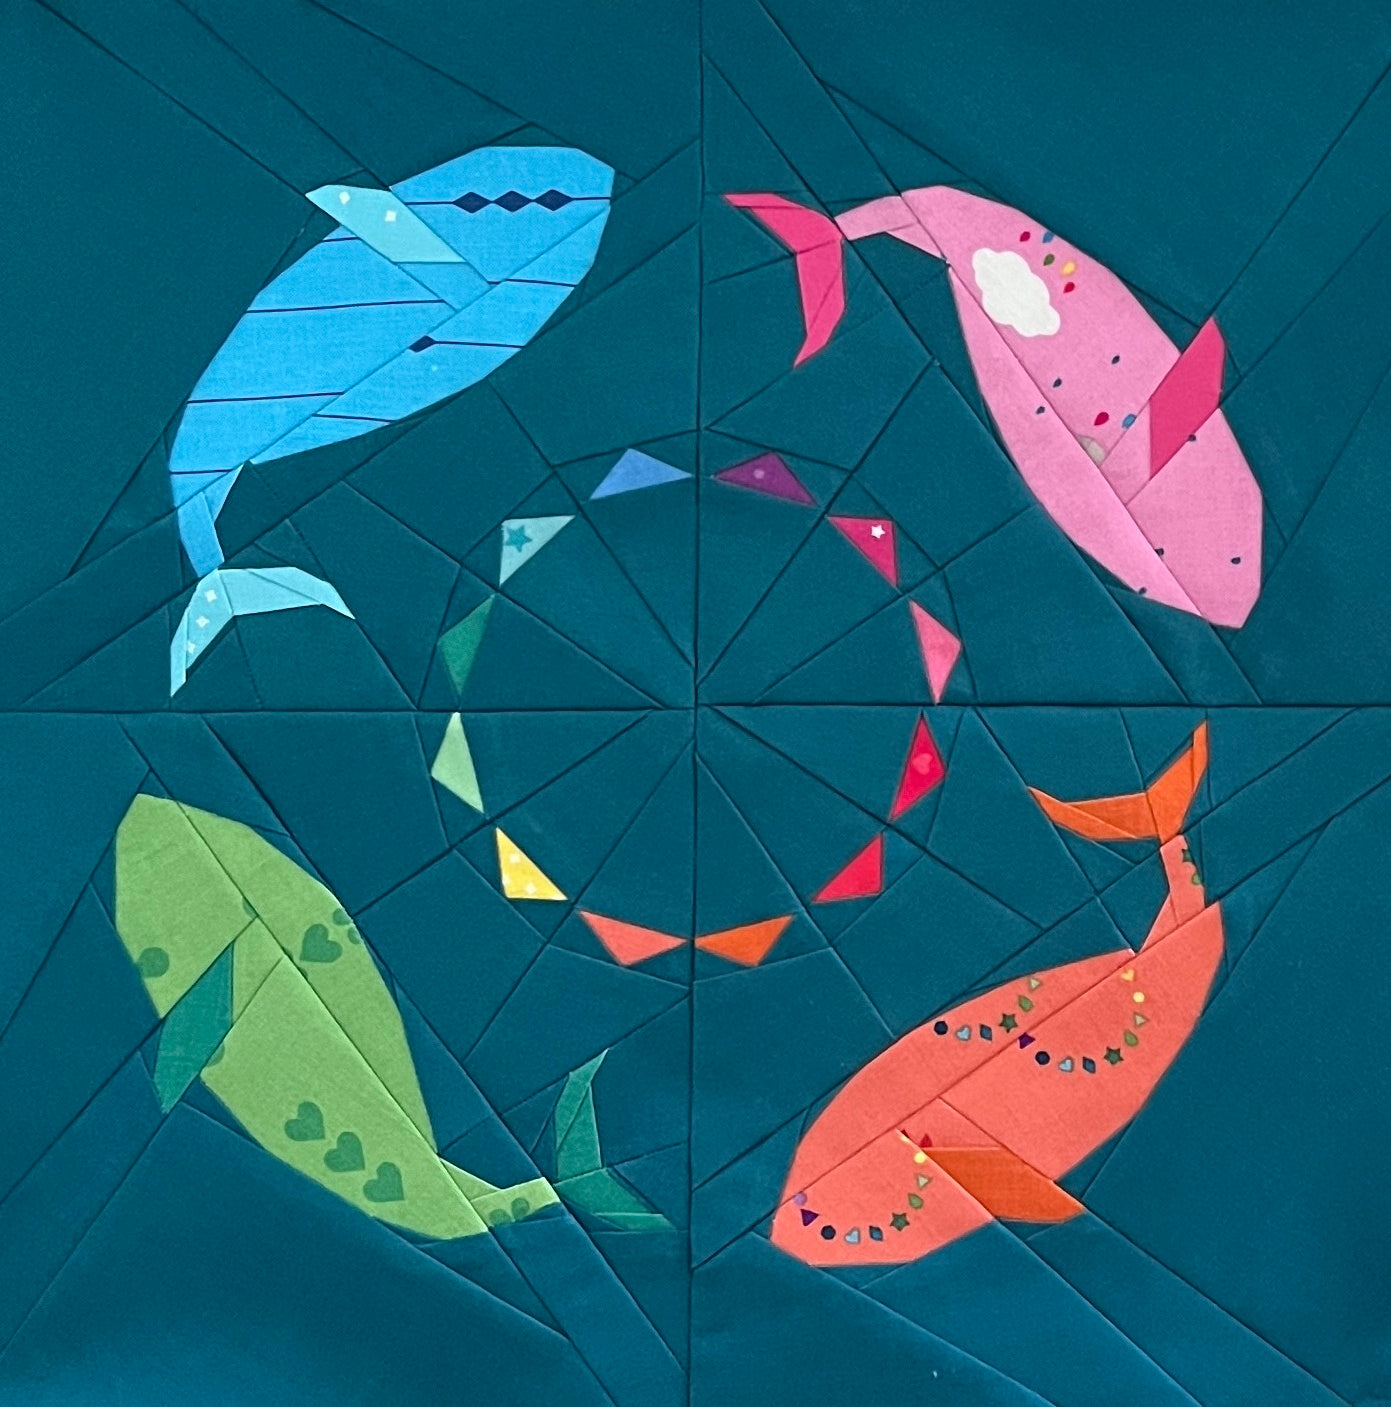 pod of whales paper pieced pattern sewn in fabric